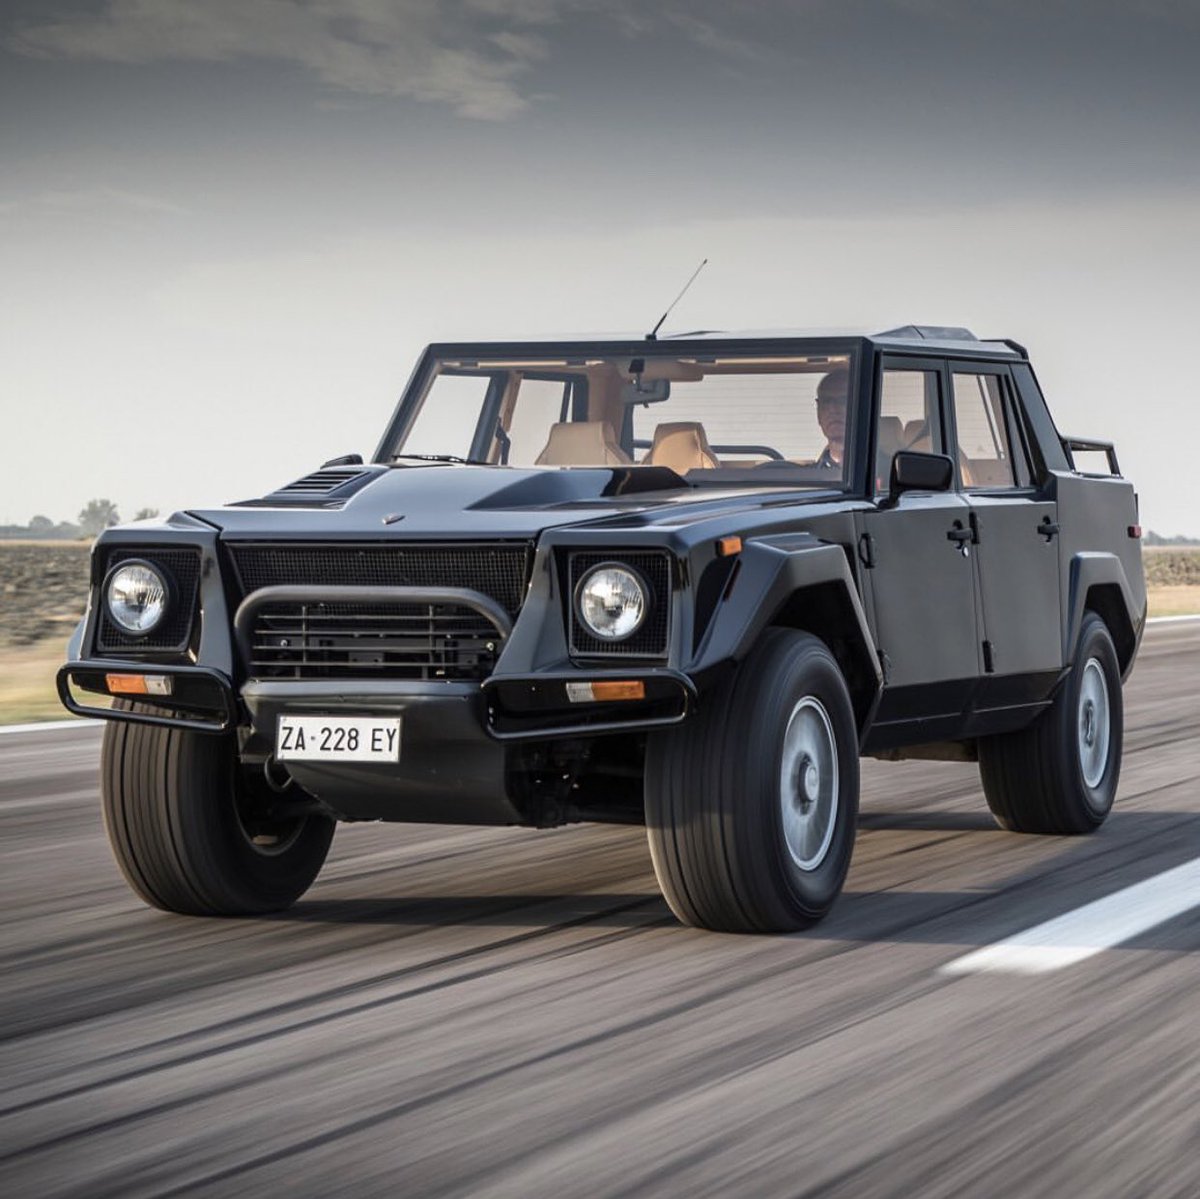 Lamborghini LM002. What’s your thoughts on this vintage truck? 

#lamborghini #supercar #madcars #luxurylifestyle #model #essex #london #luxurycarhire #carswithoutlimits #italian #germany #supercarlifestyle #amazingcars247 #supercarsdaily700